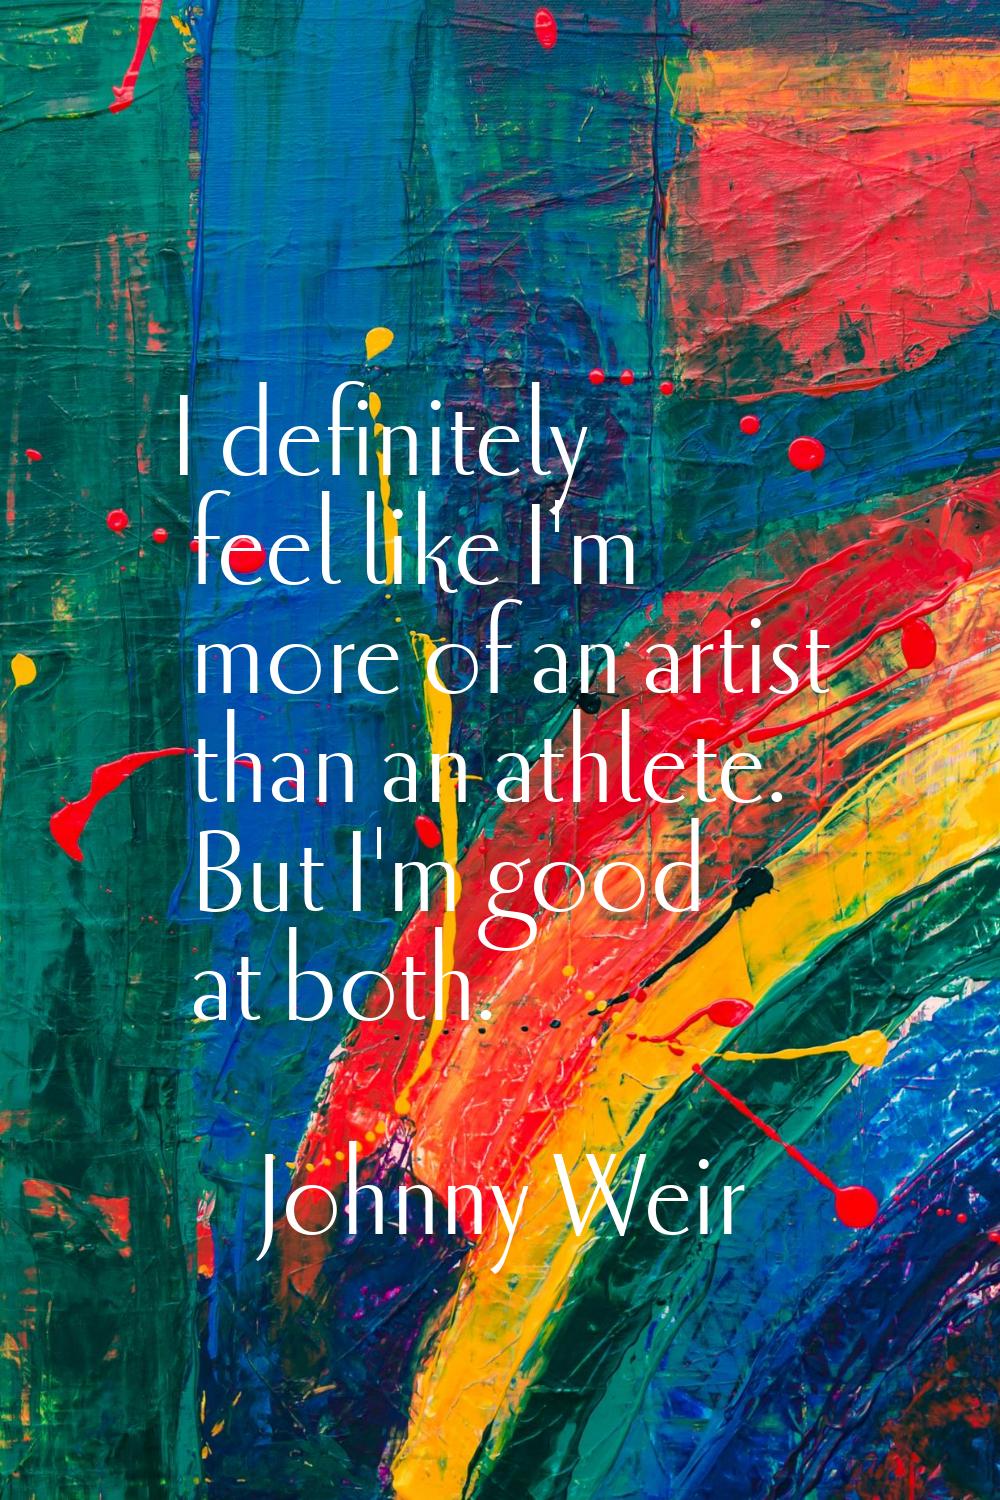 I definitely feel like I'm more of an artist than an athlete. But I'm good at both.